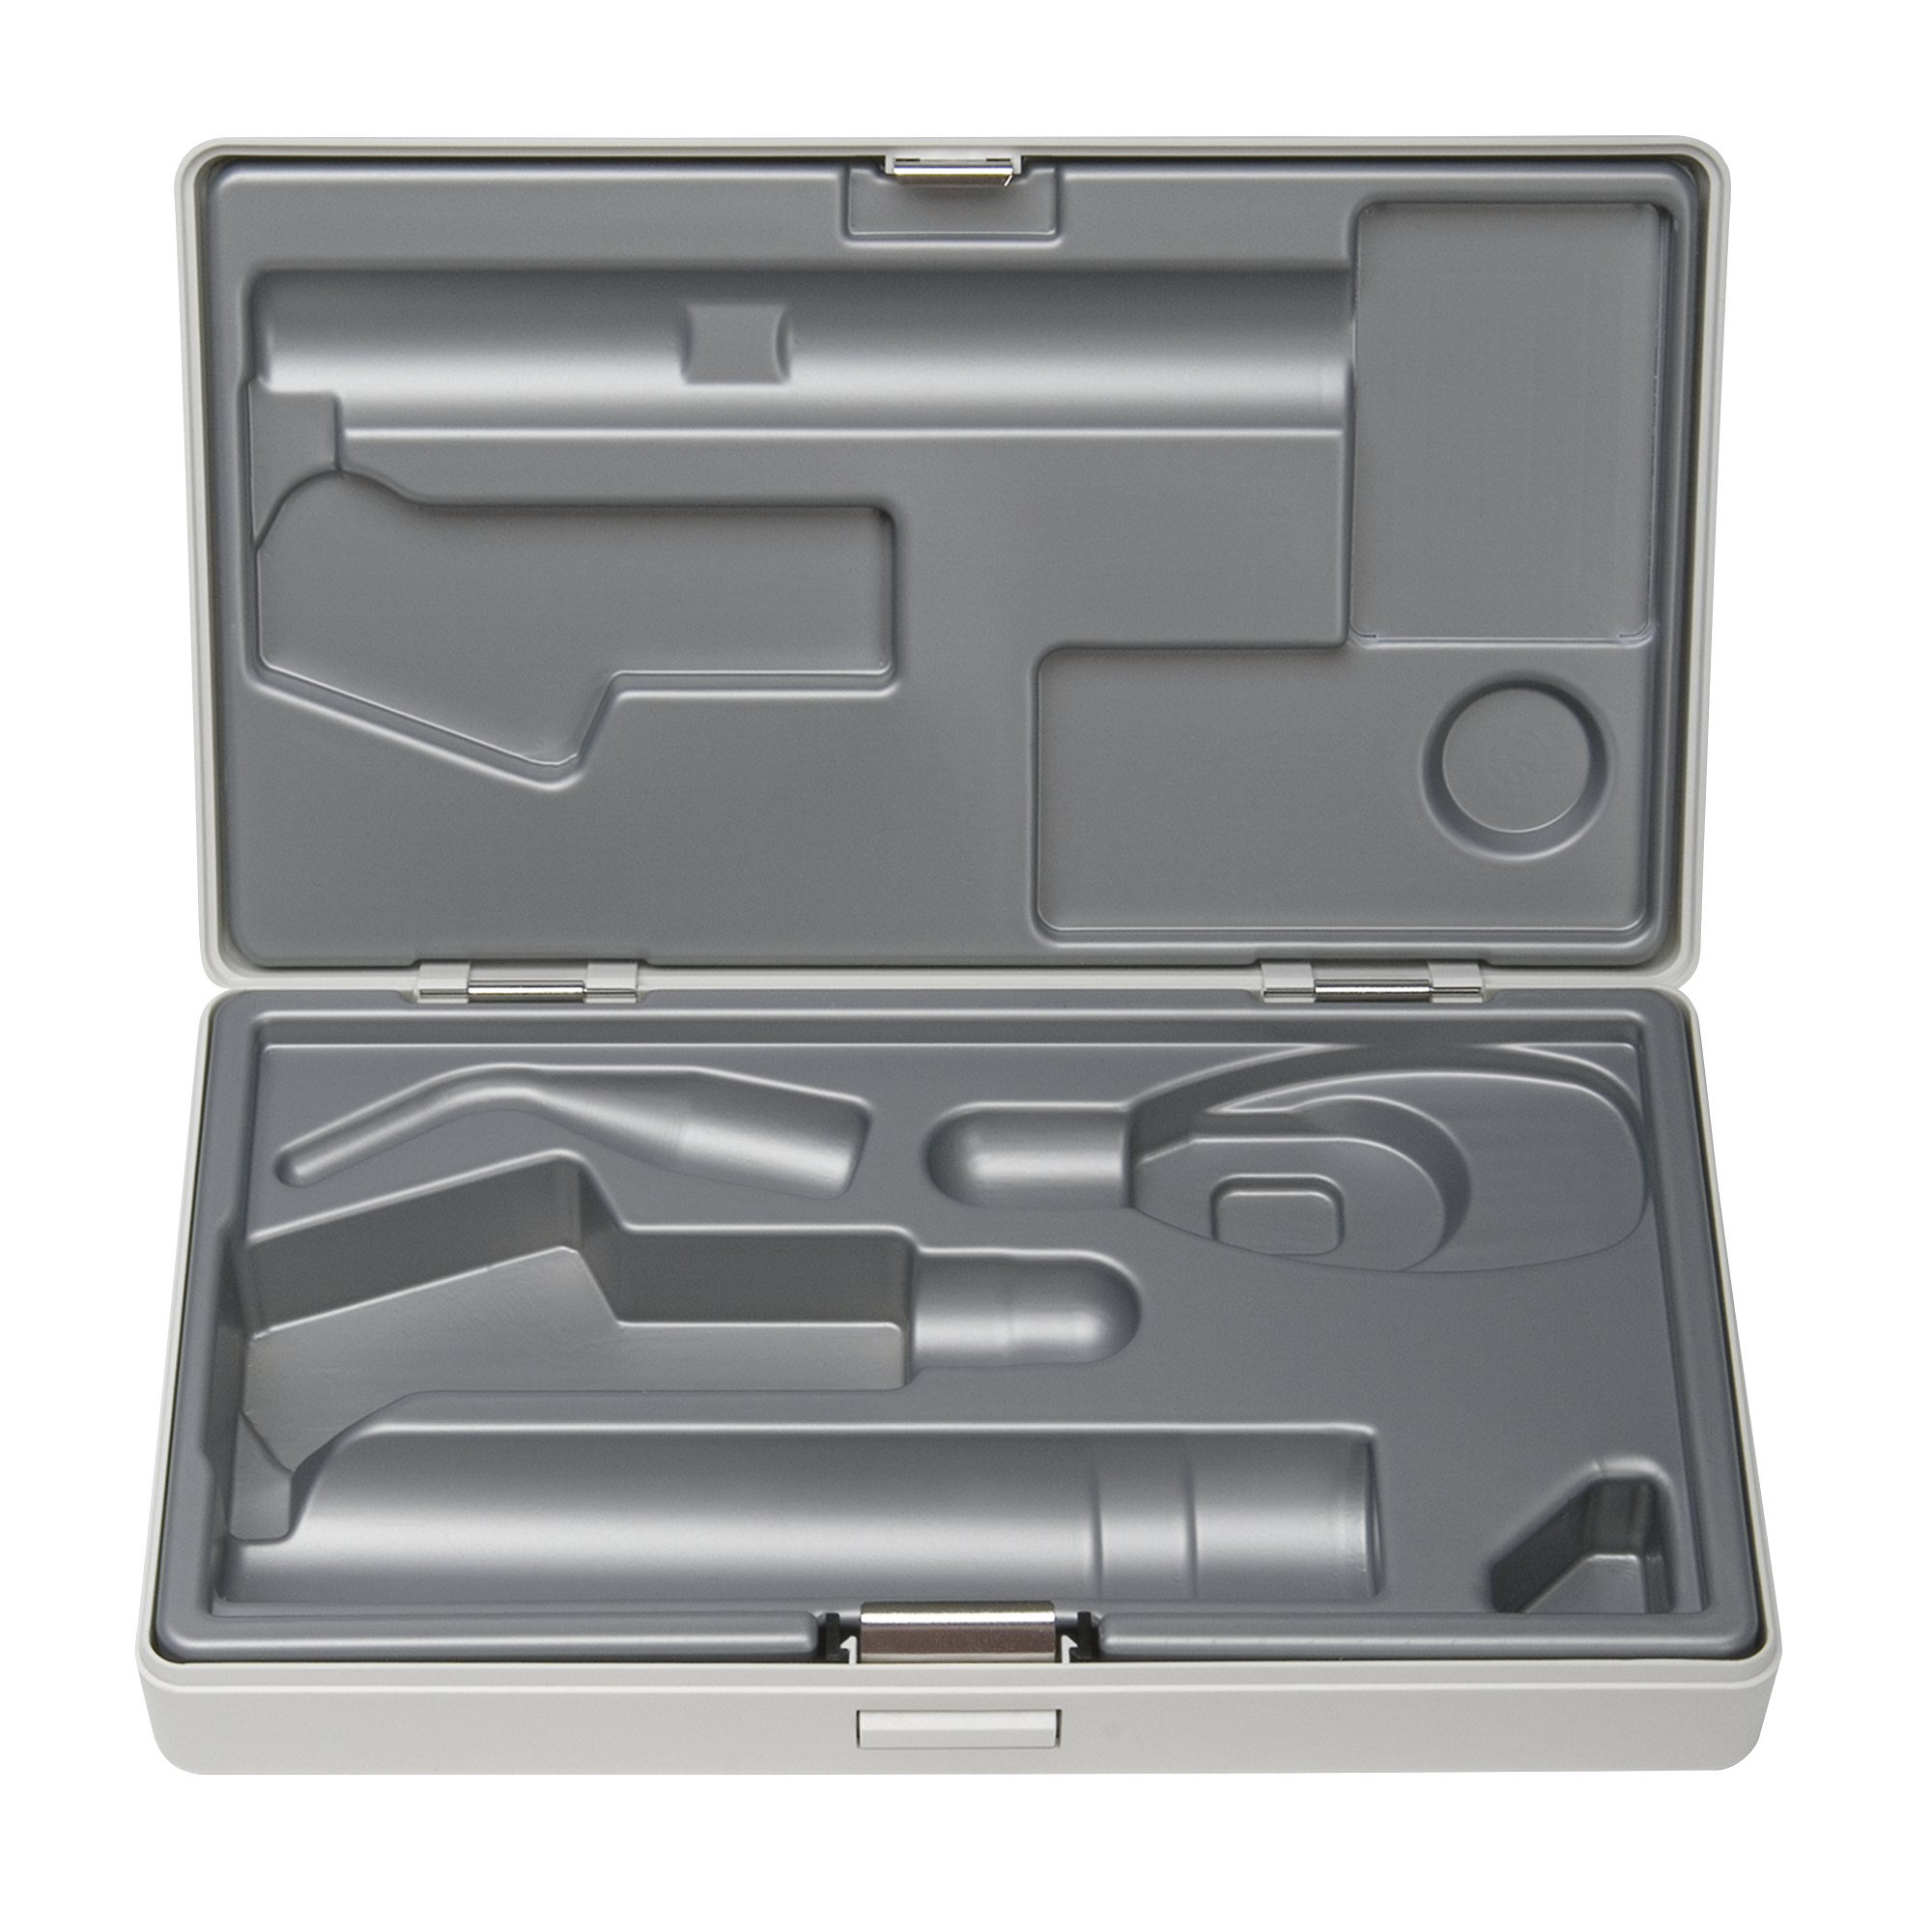 HEINE Hard case for Ophthalmic Diagnostic Sets C-262 and C-145